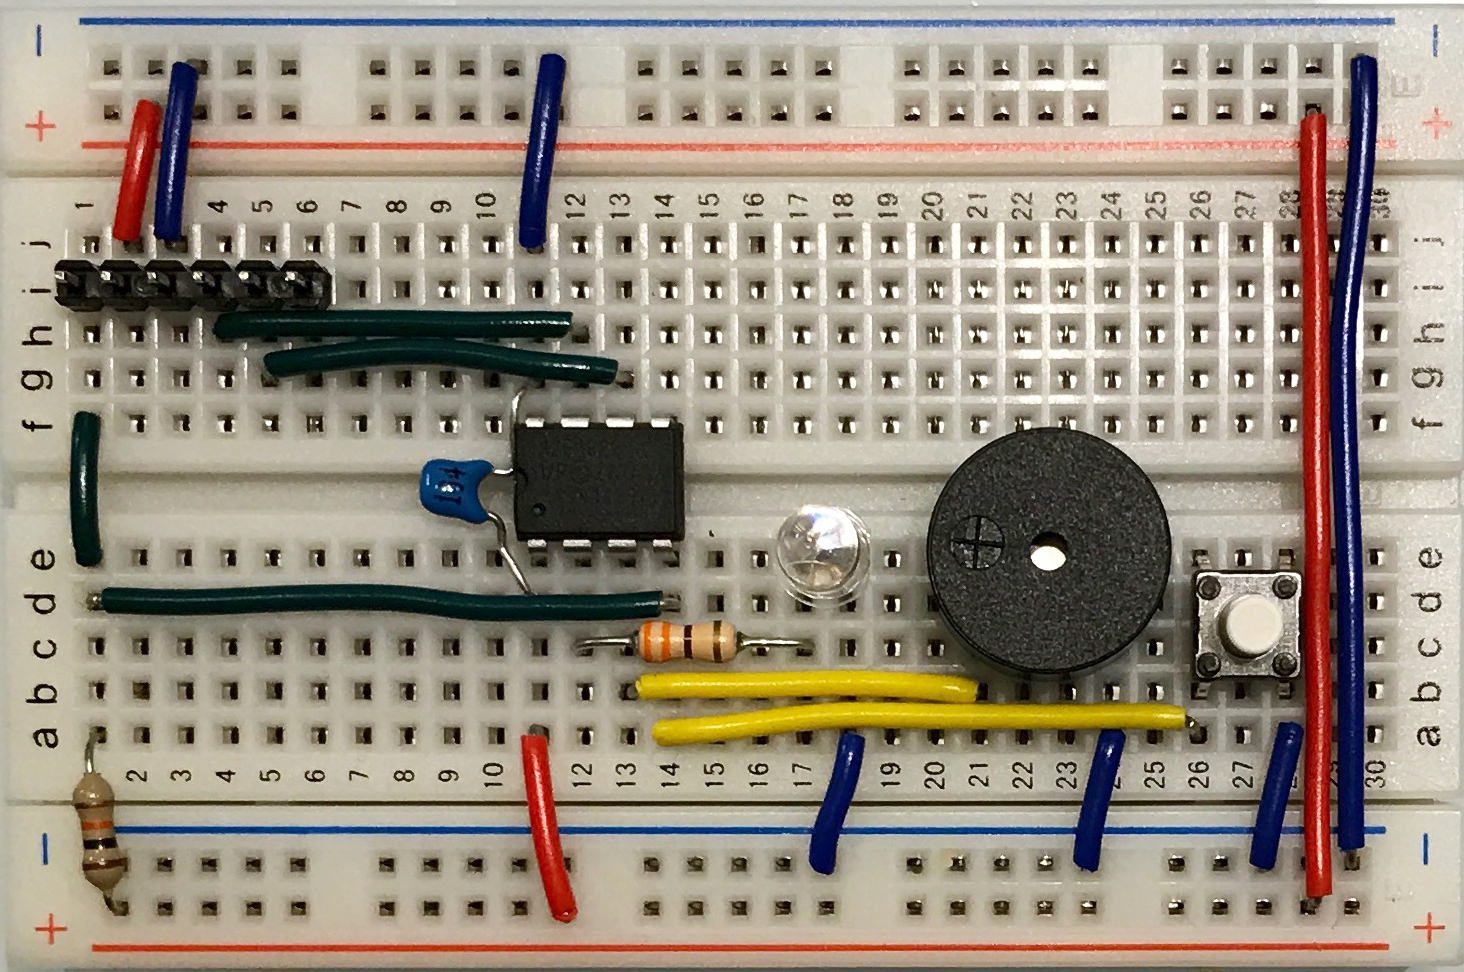 Pic basic 26 buzzer completed breadboard